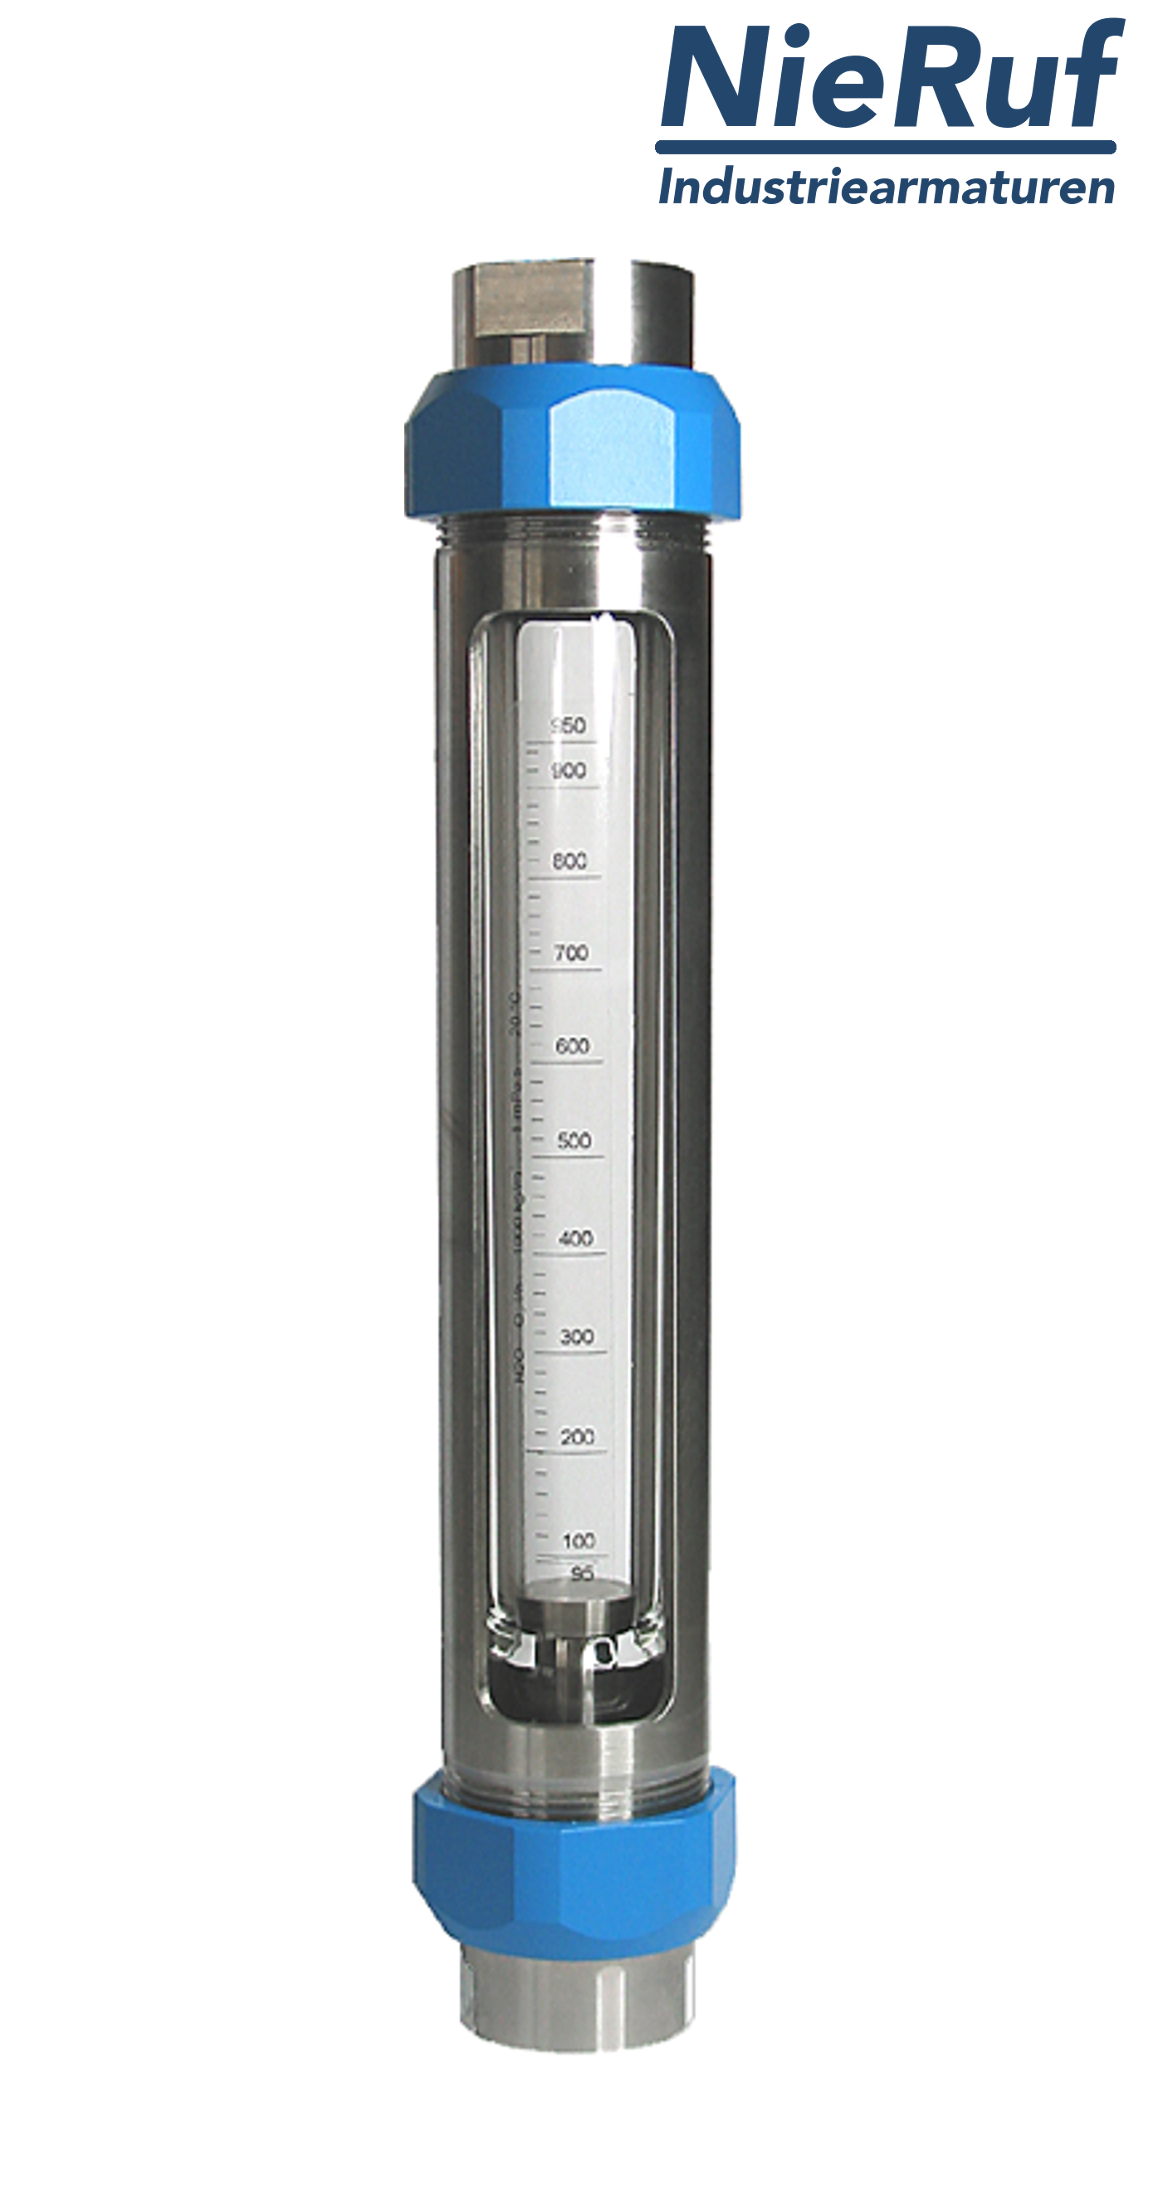 Variable area flowmeter stainless steel + borosilicate 1/2" inch 80.0 - 800 l/h water FKM